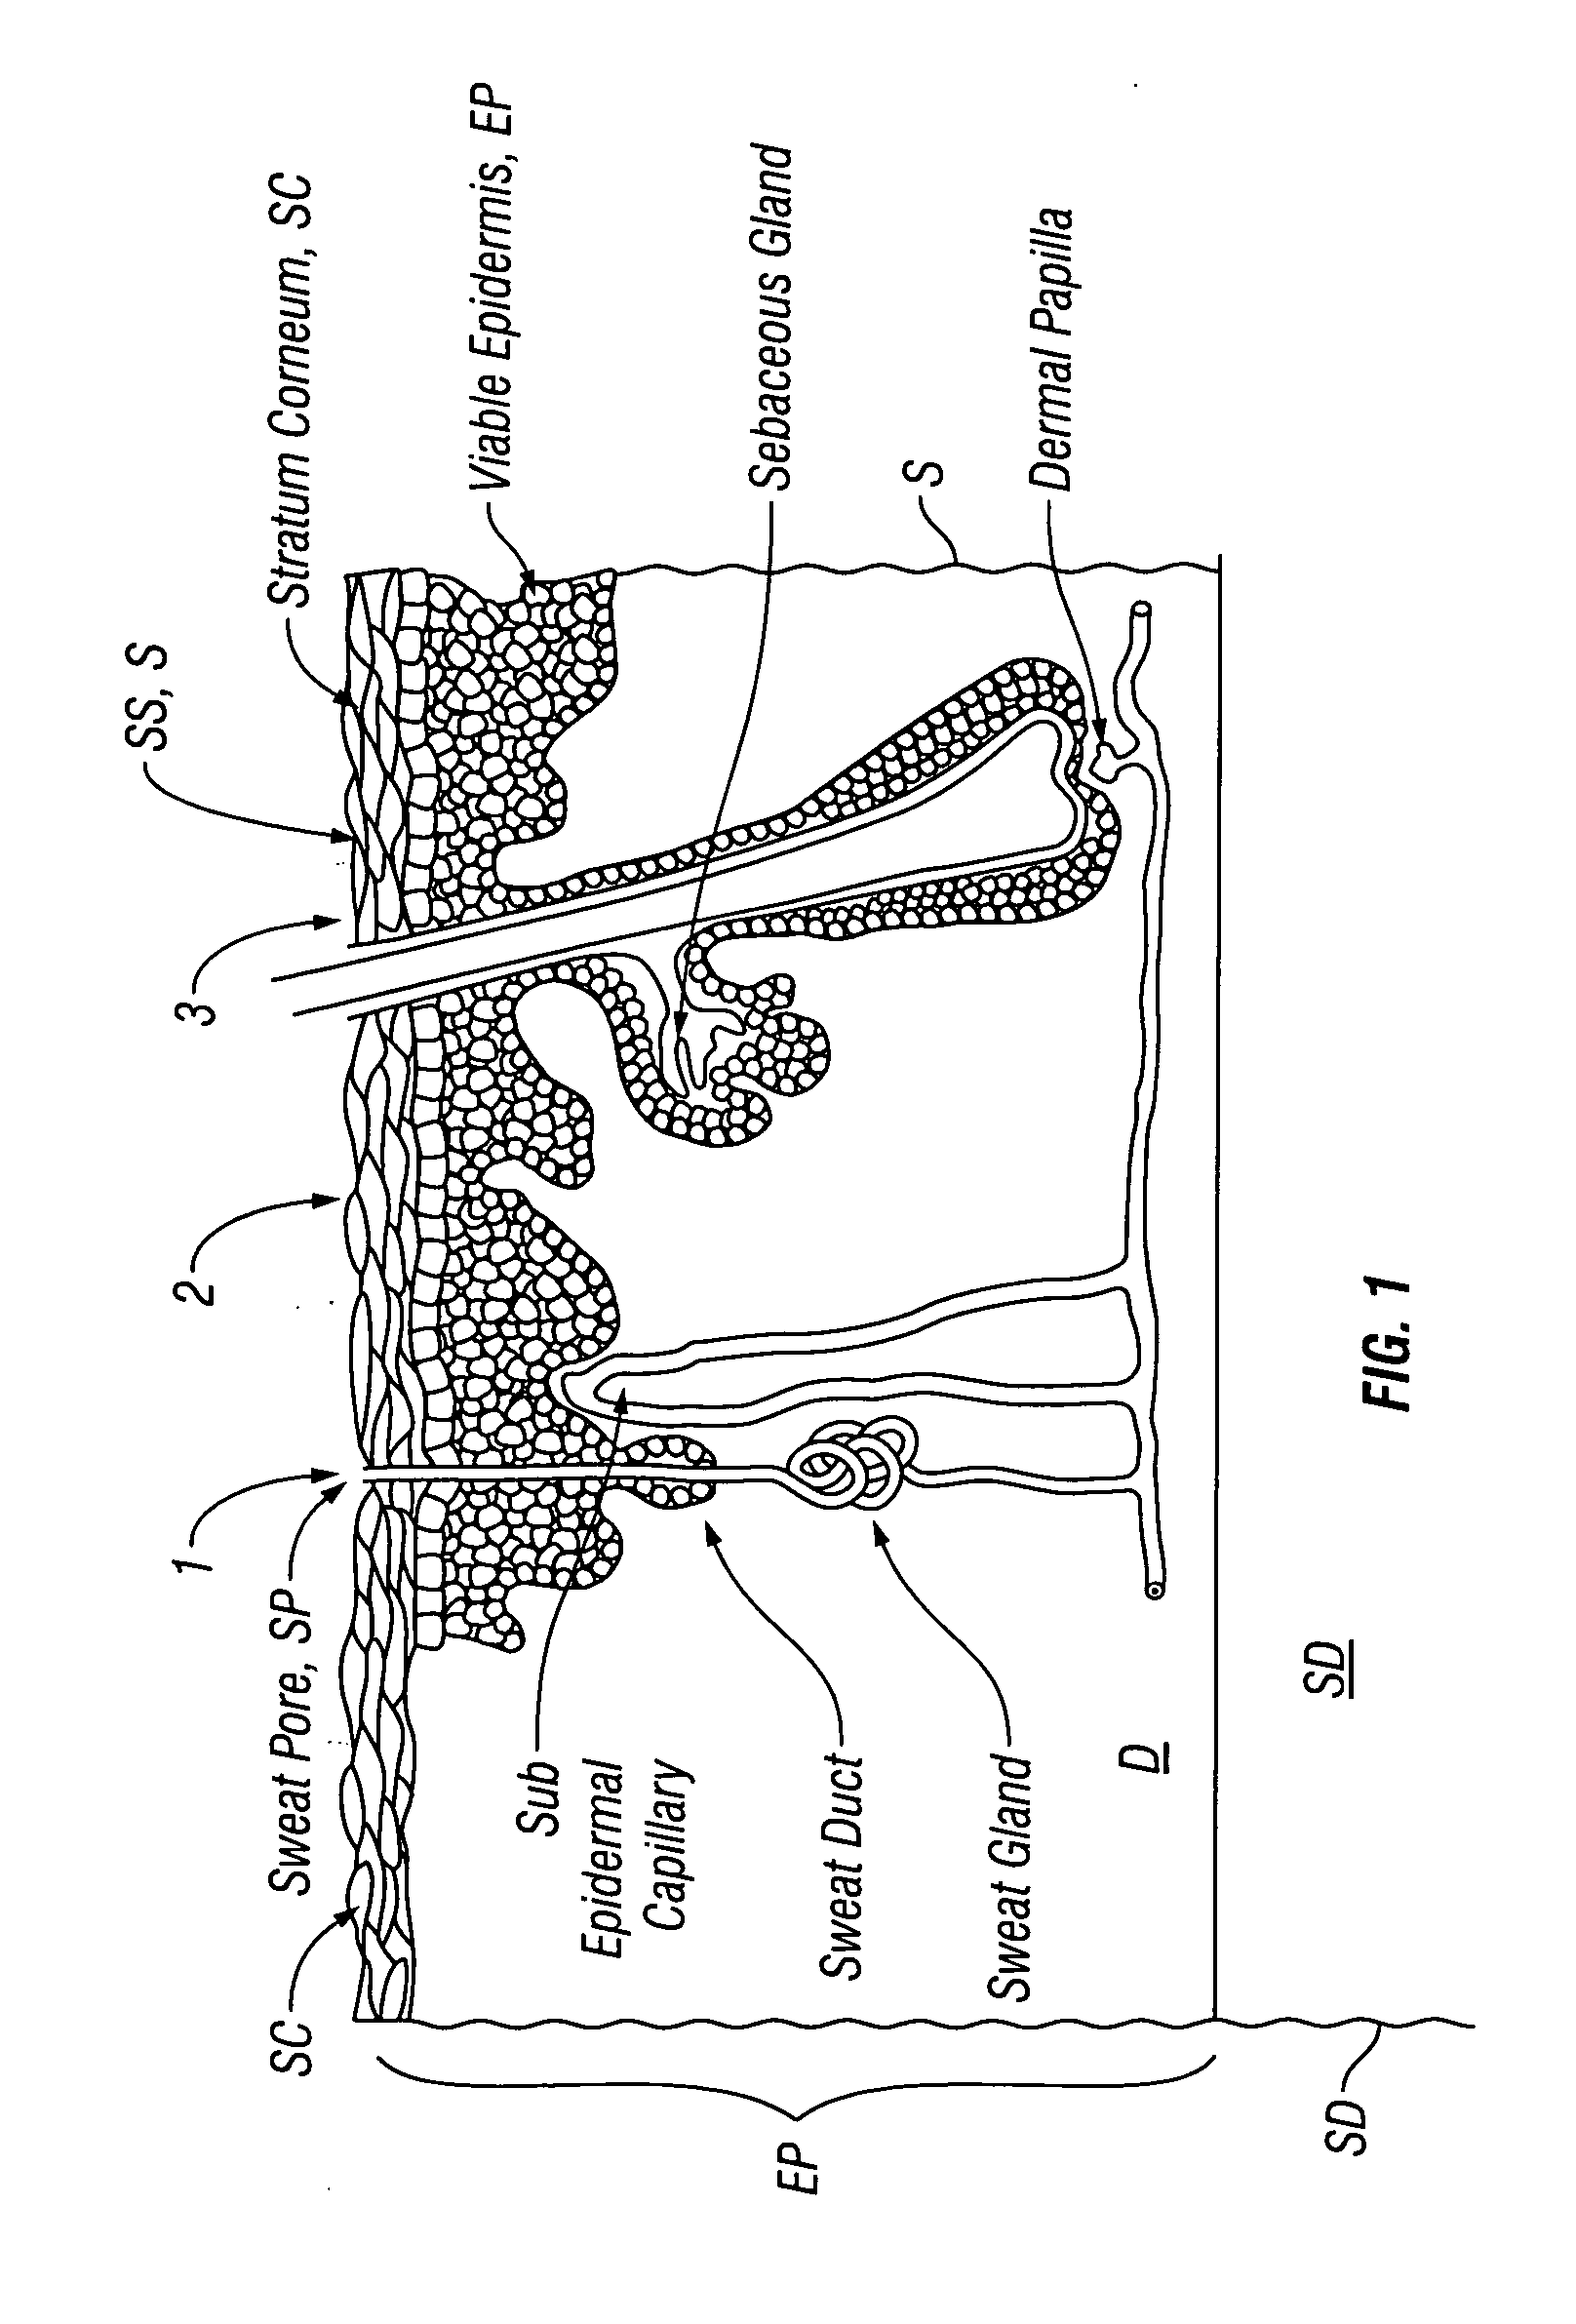 Method and apparatus for oscillatory iontophoretic transdermal delivery of a therapeutic agent